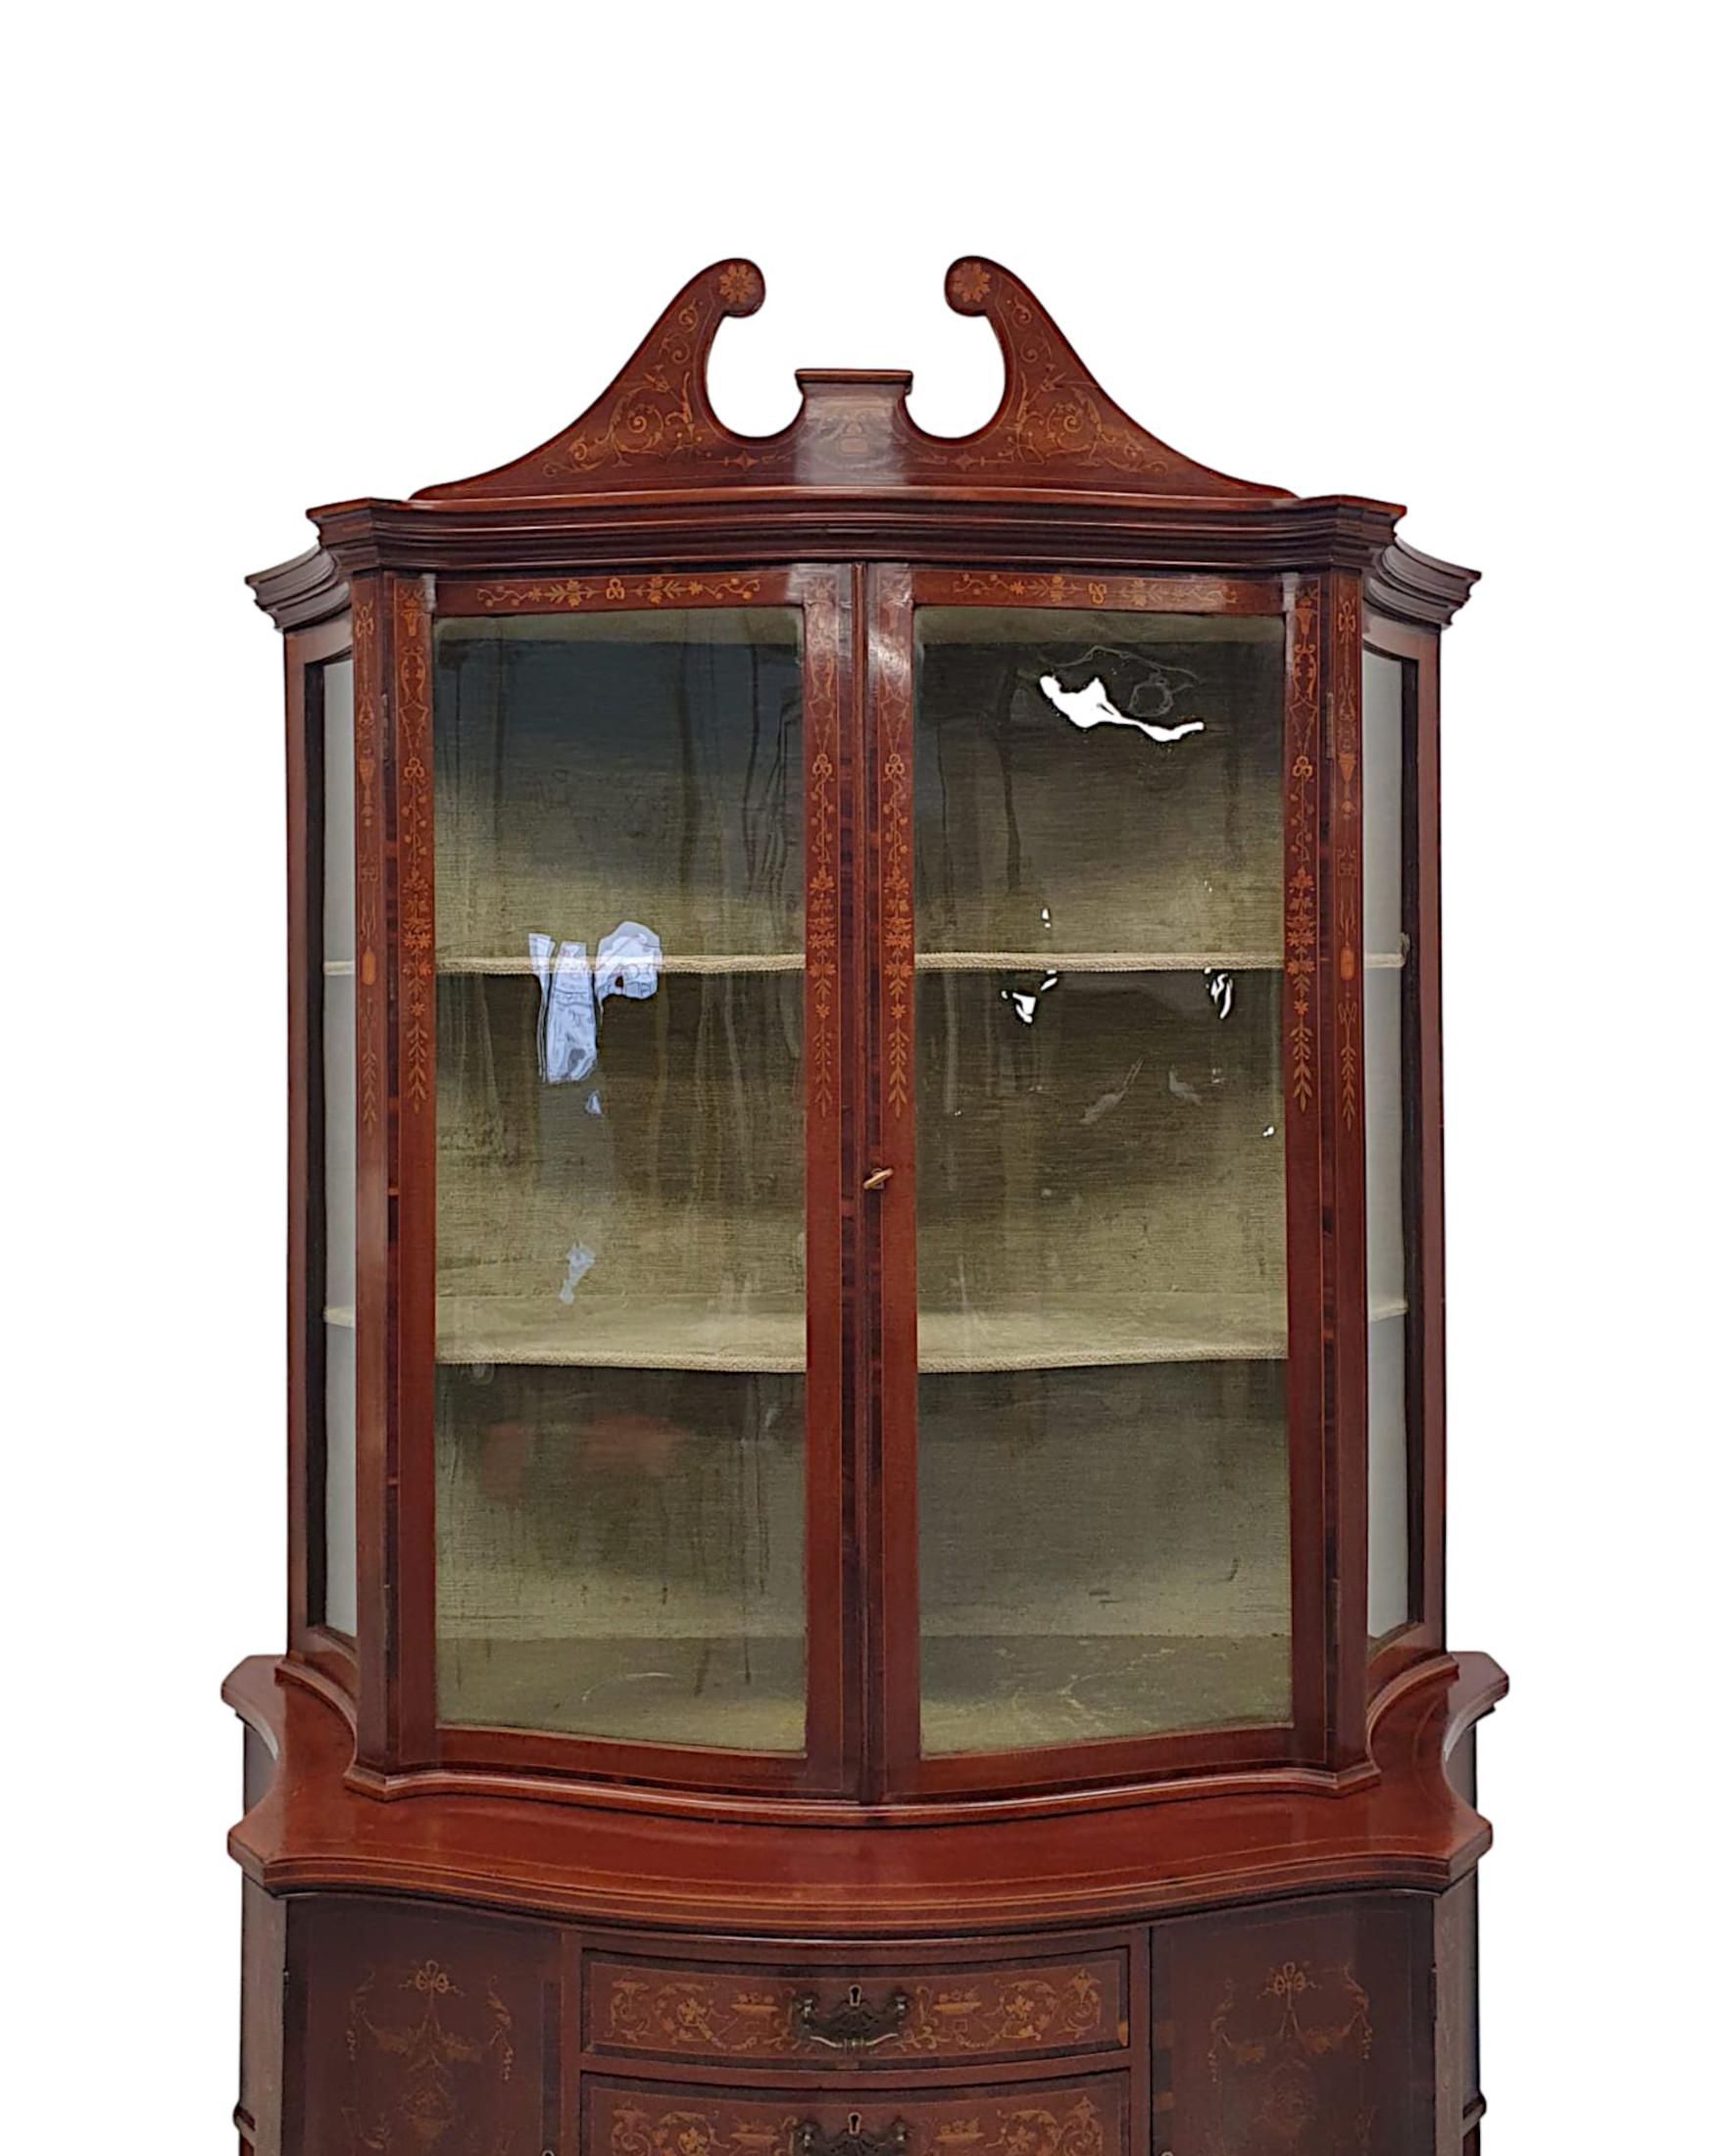 Exceptional Edwardian Display Case Attributed to Edward and Roberts im Zustand „Gut“ im Angebot in Dublin, IE